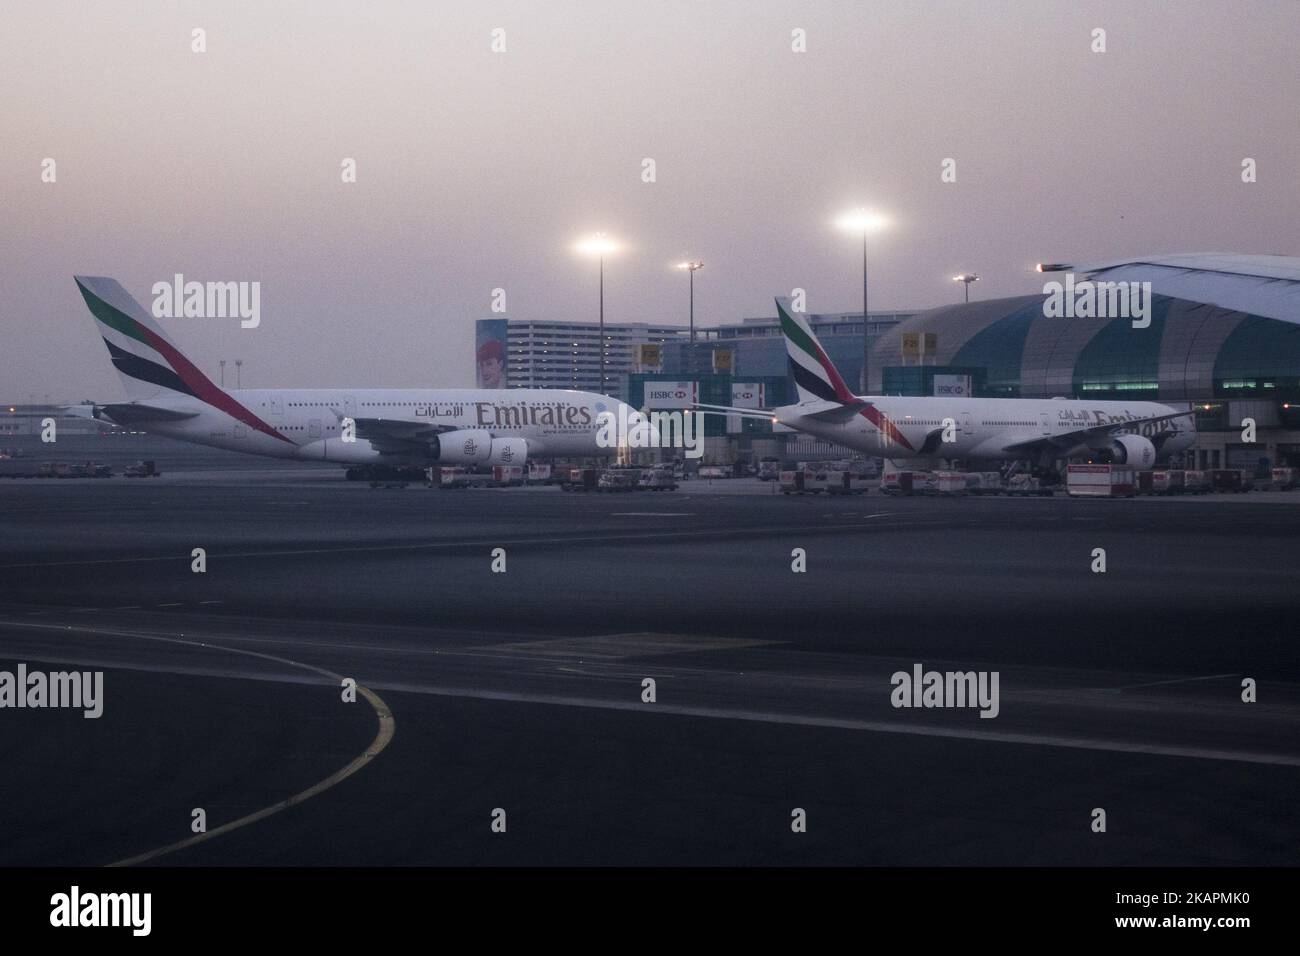 A picture taken on August 21, 2017 shows an Emirates airline Boeing 777 parked on the tarmac at Dubai airport, UAE. Dubai International Airport, the largest airport in space in the world and busiest airport by international passenger traffic. It is also the 3rd busiest airport in the world by total passenger traffic. About 84.000.000 million passengers passed in 2016 from DXB. Emirates and Fludubai are the primary users of the airport, connecting Middle East to all over the world. Also FedEx Express and Qantas uses the airport as a hub. (Photo by Nicolas Economou/NurPhoto) Stock Photo